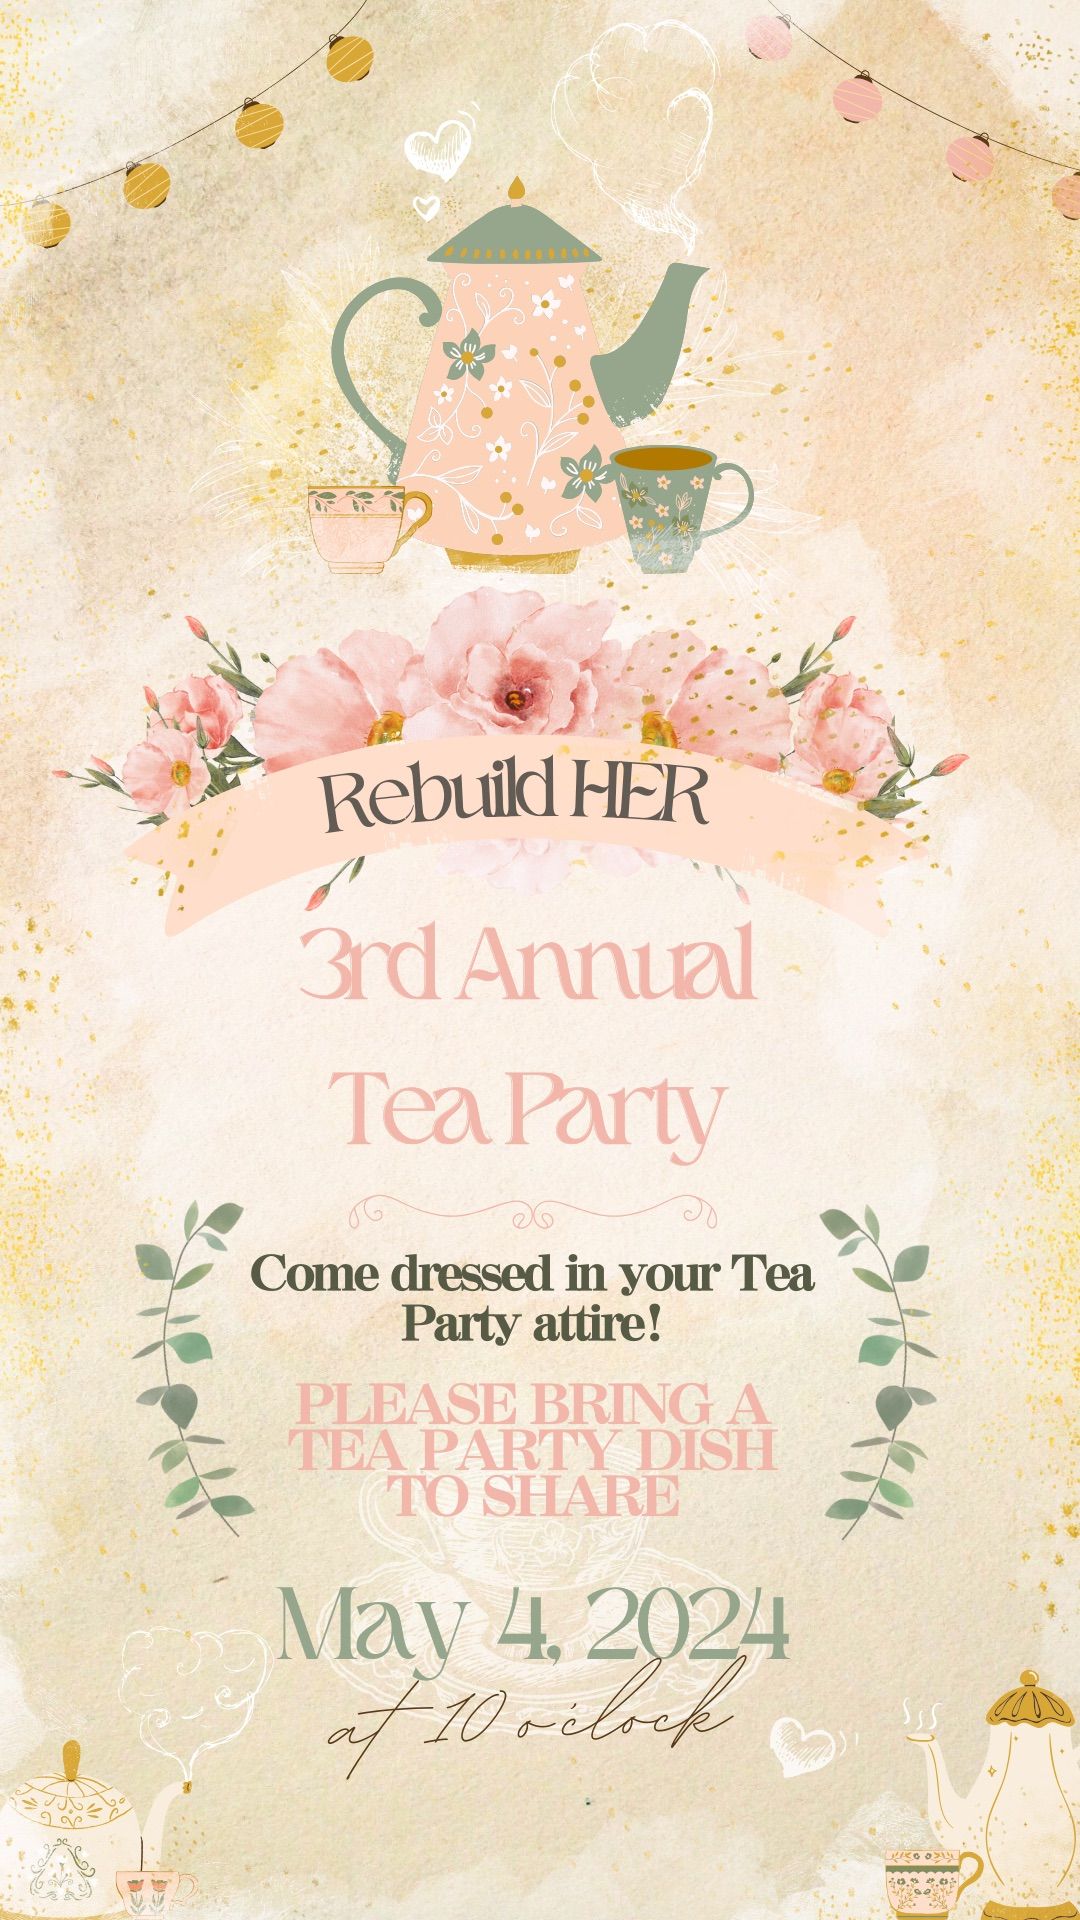 Rebuild HER 3rd Annual Tea Party 